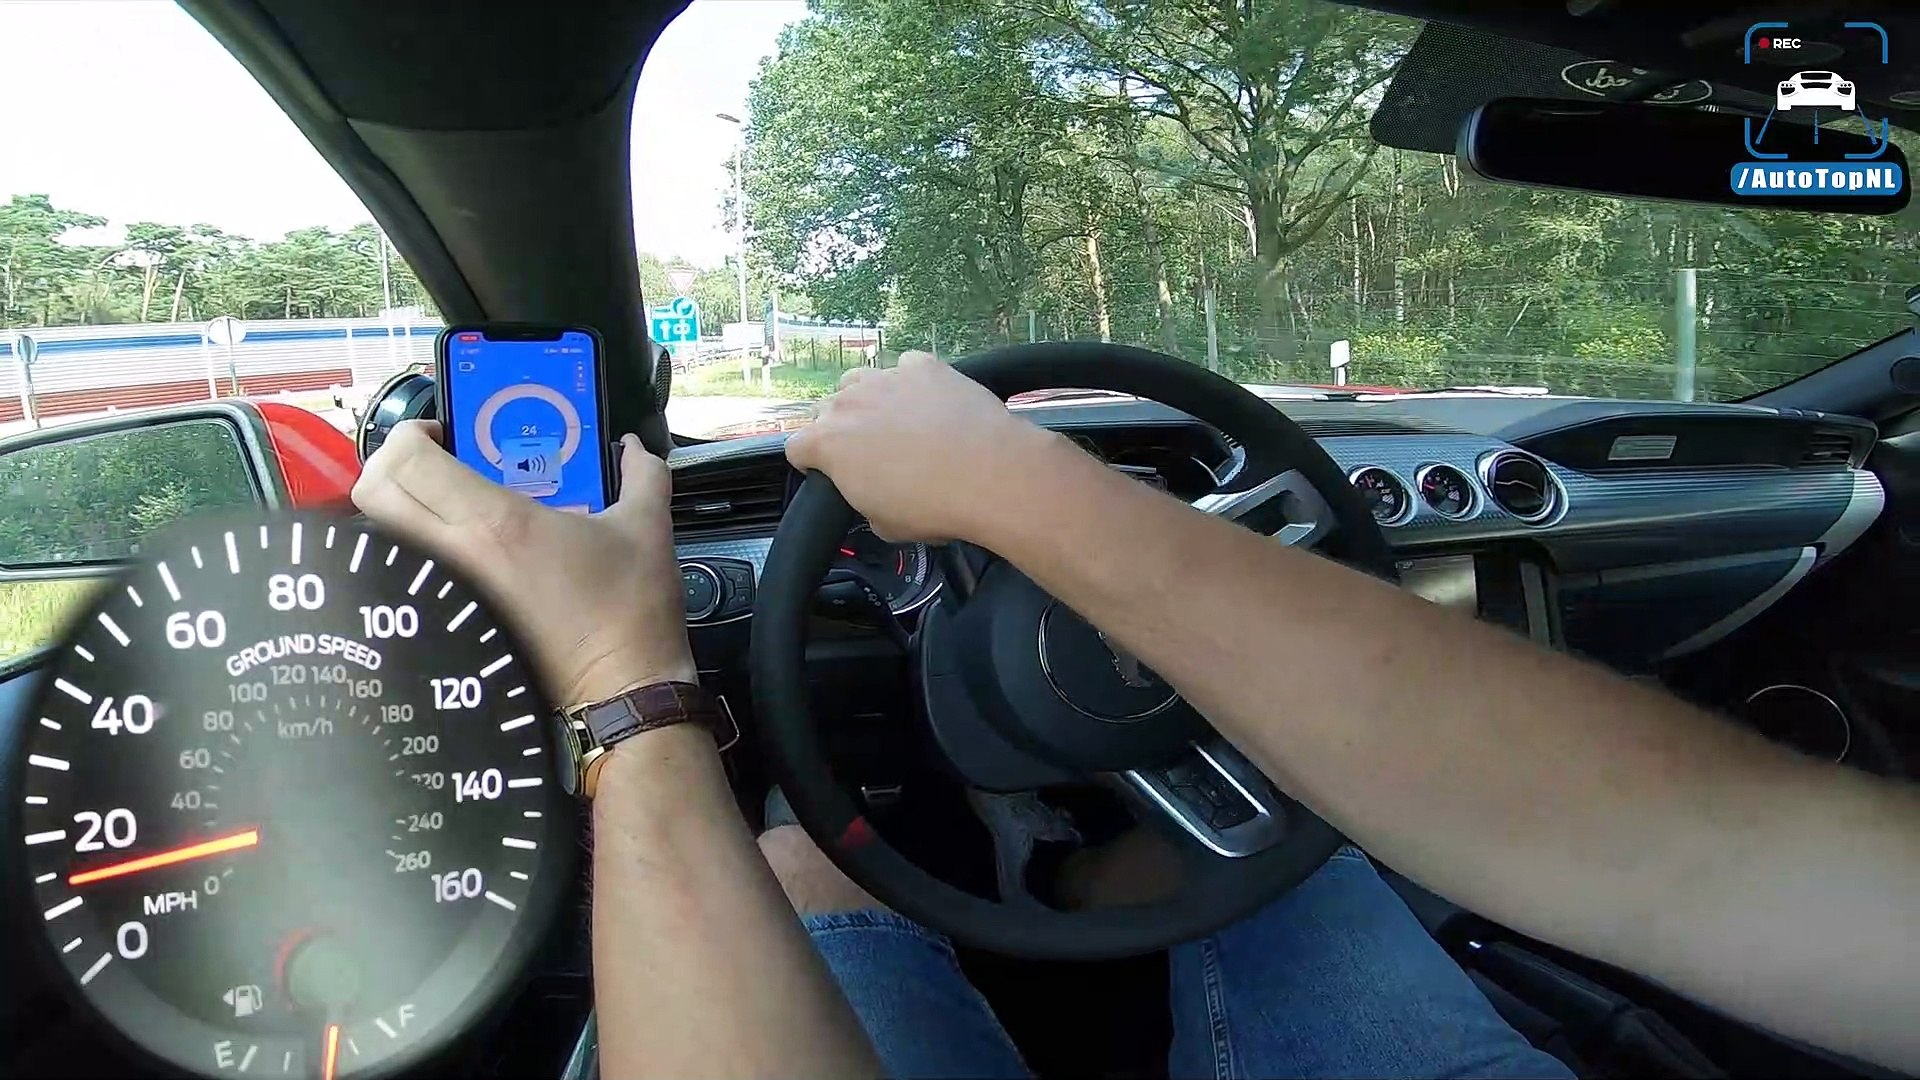 780HP FORD MUSTANG GT SUPERCHARGED on AUTOBAHN (No Speed Limit) by AutoTopNL